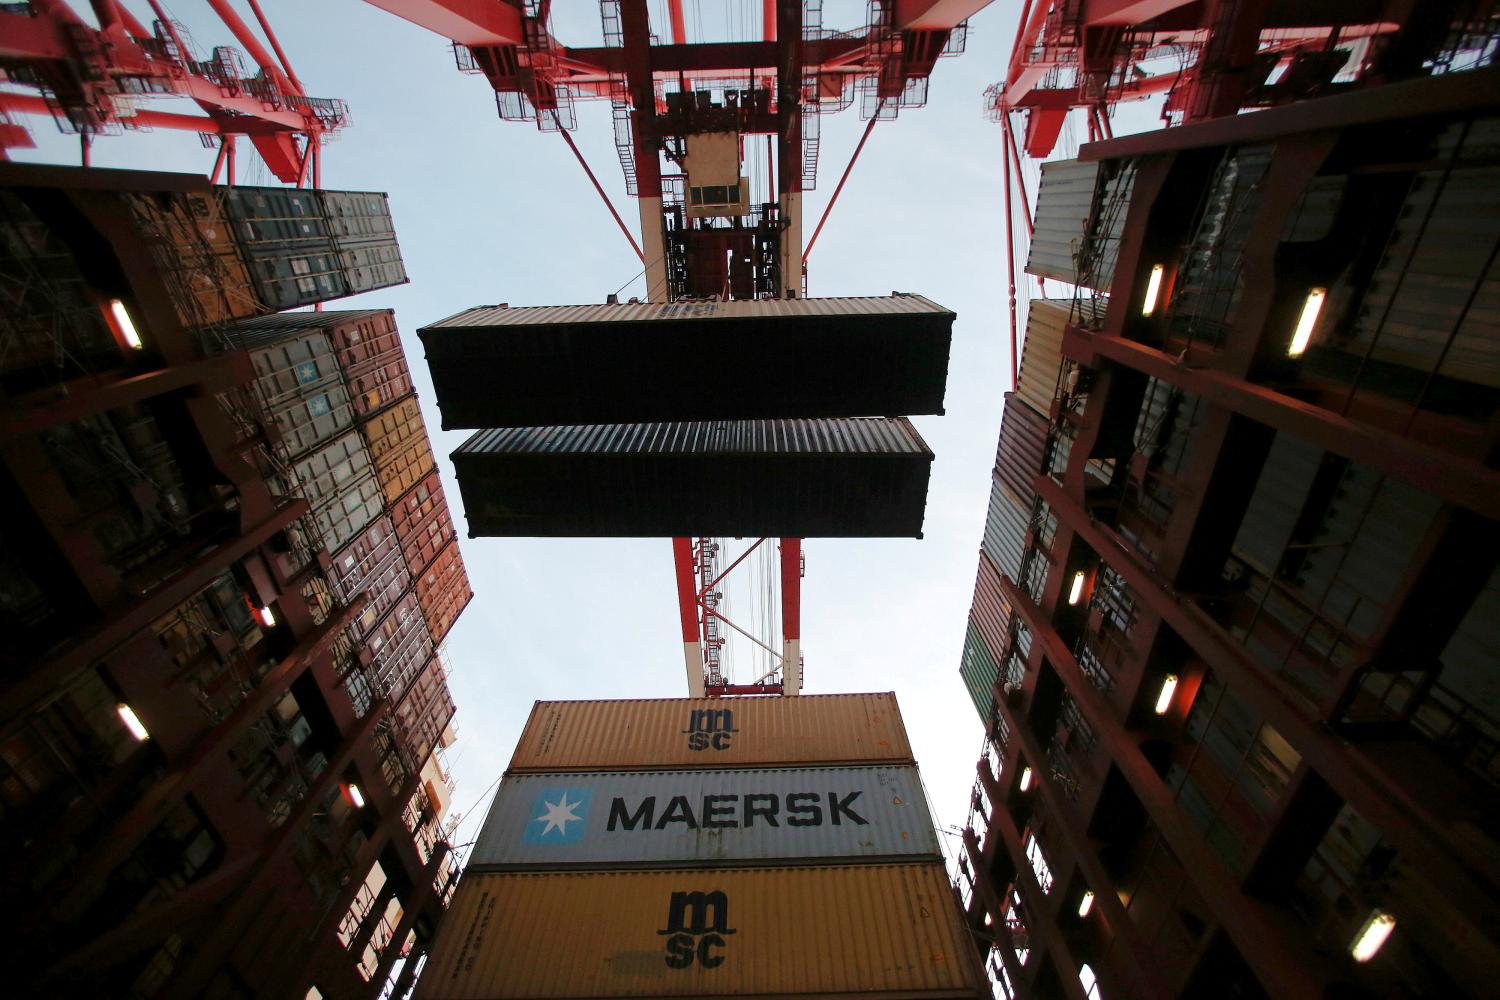 Containers are seen unloaded from the Maersk's Triple-E giant container ship Maersk Majestic, one of the world's largest container ships, at the Yangshan Deep Water Port, part of the Shanghai Free Trade Zone, in Shanghai, China, September 24, 2016. Picture taken September 24, 2016. REUTERS/Aly Song - RTSS0CS